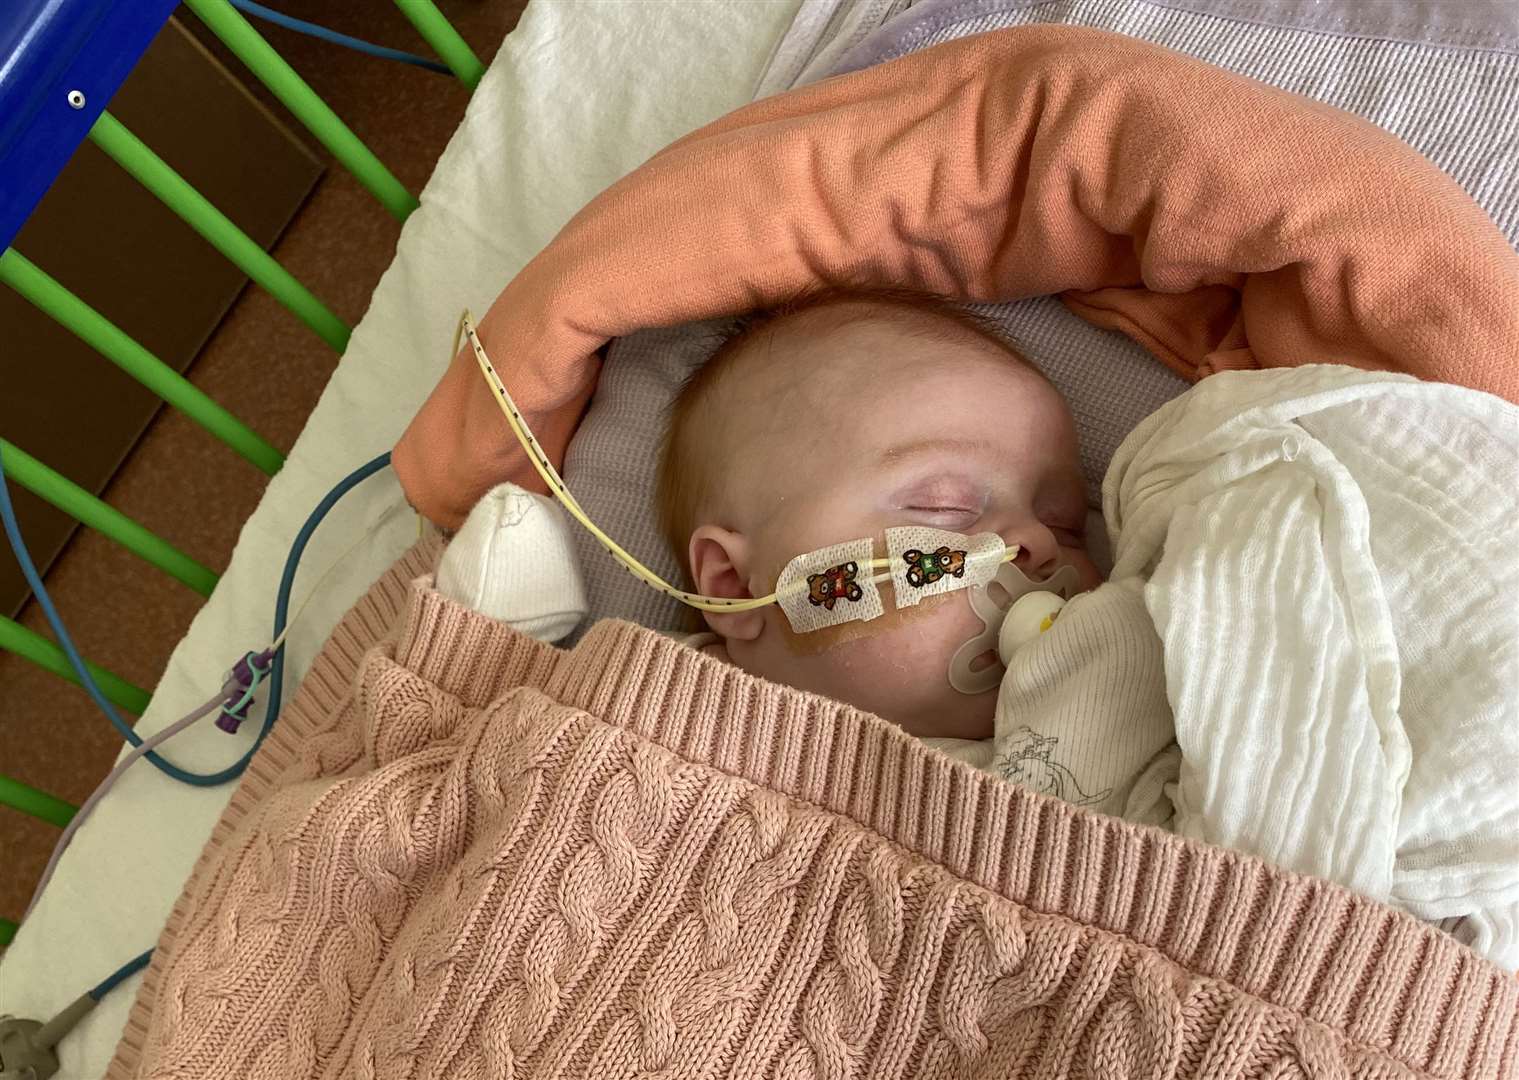 Mia was put on a ventilator for seven days before surgery